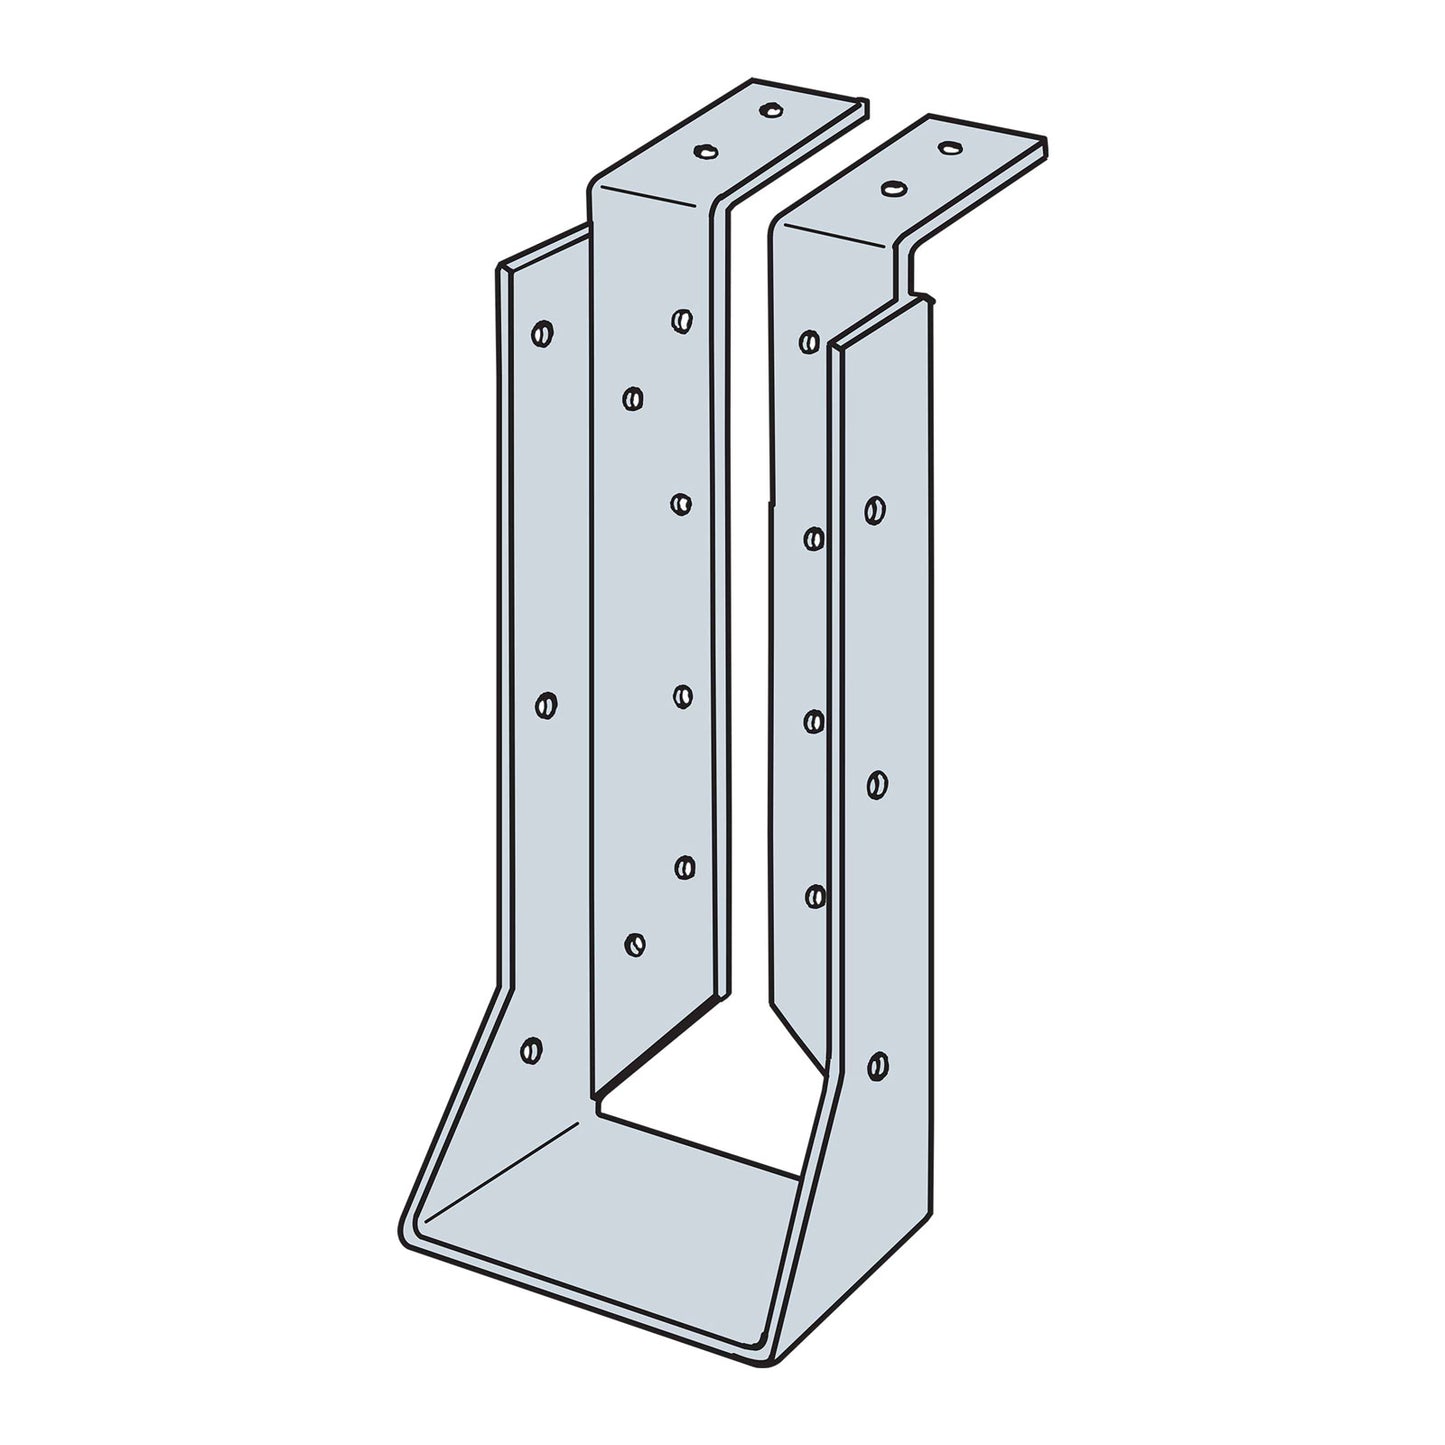 Simpson HUC416TF Heavy Top-Flange Hanger with Concealed Flanges - G90 Galvanized